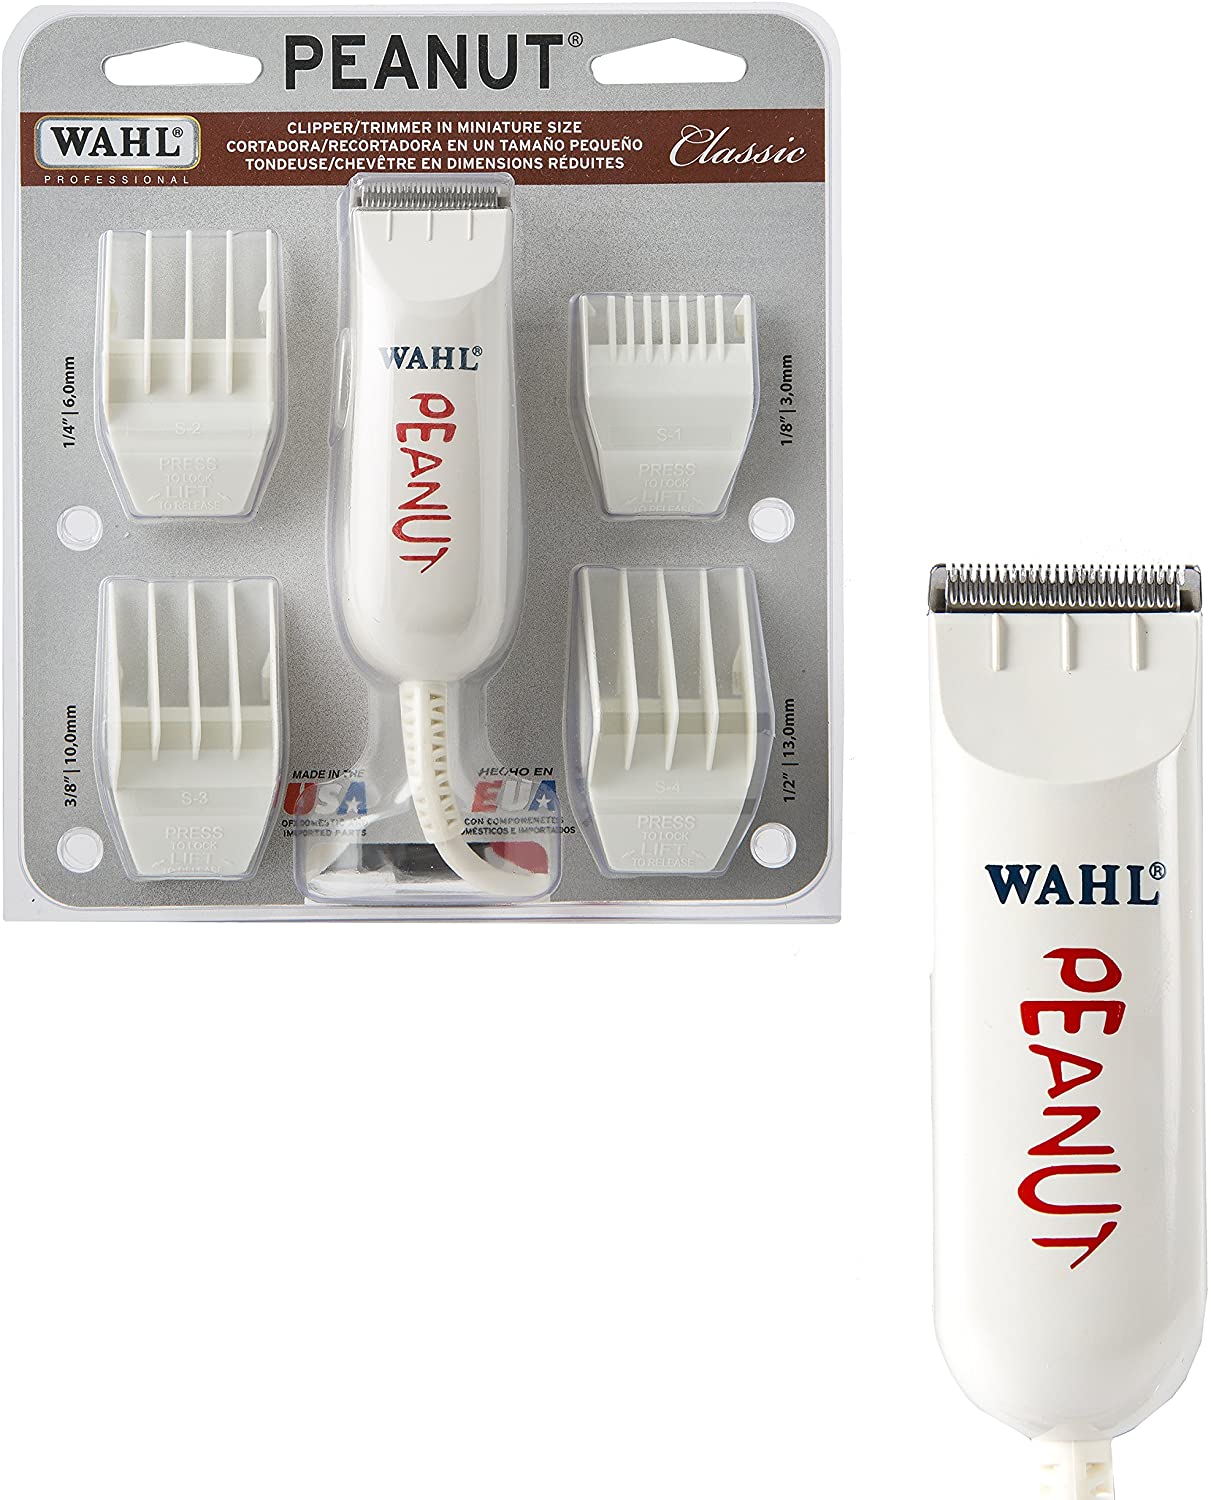 Wahl Professional Peanut Classic Hair Clipper/Trimmer #8685, White